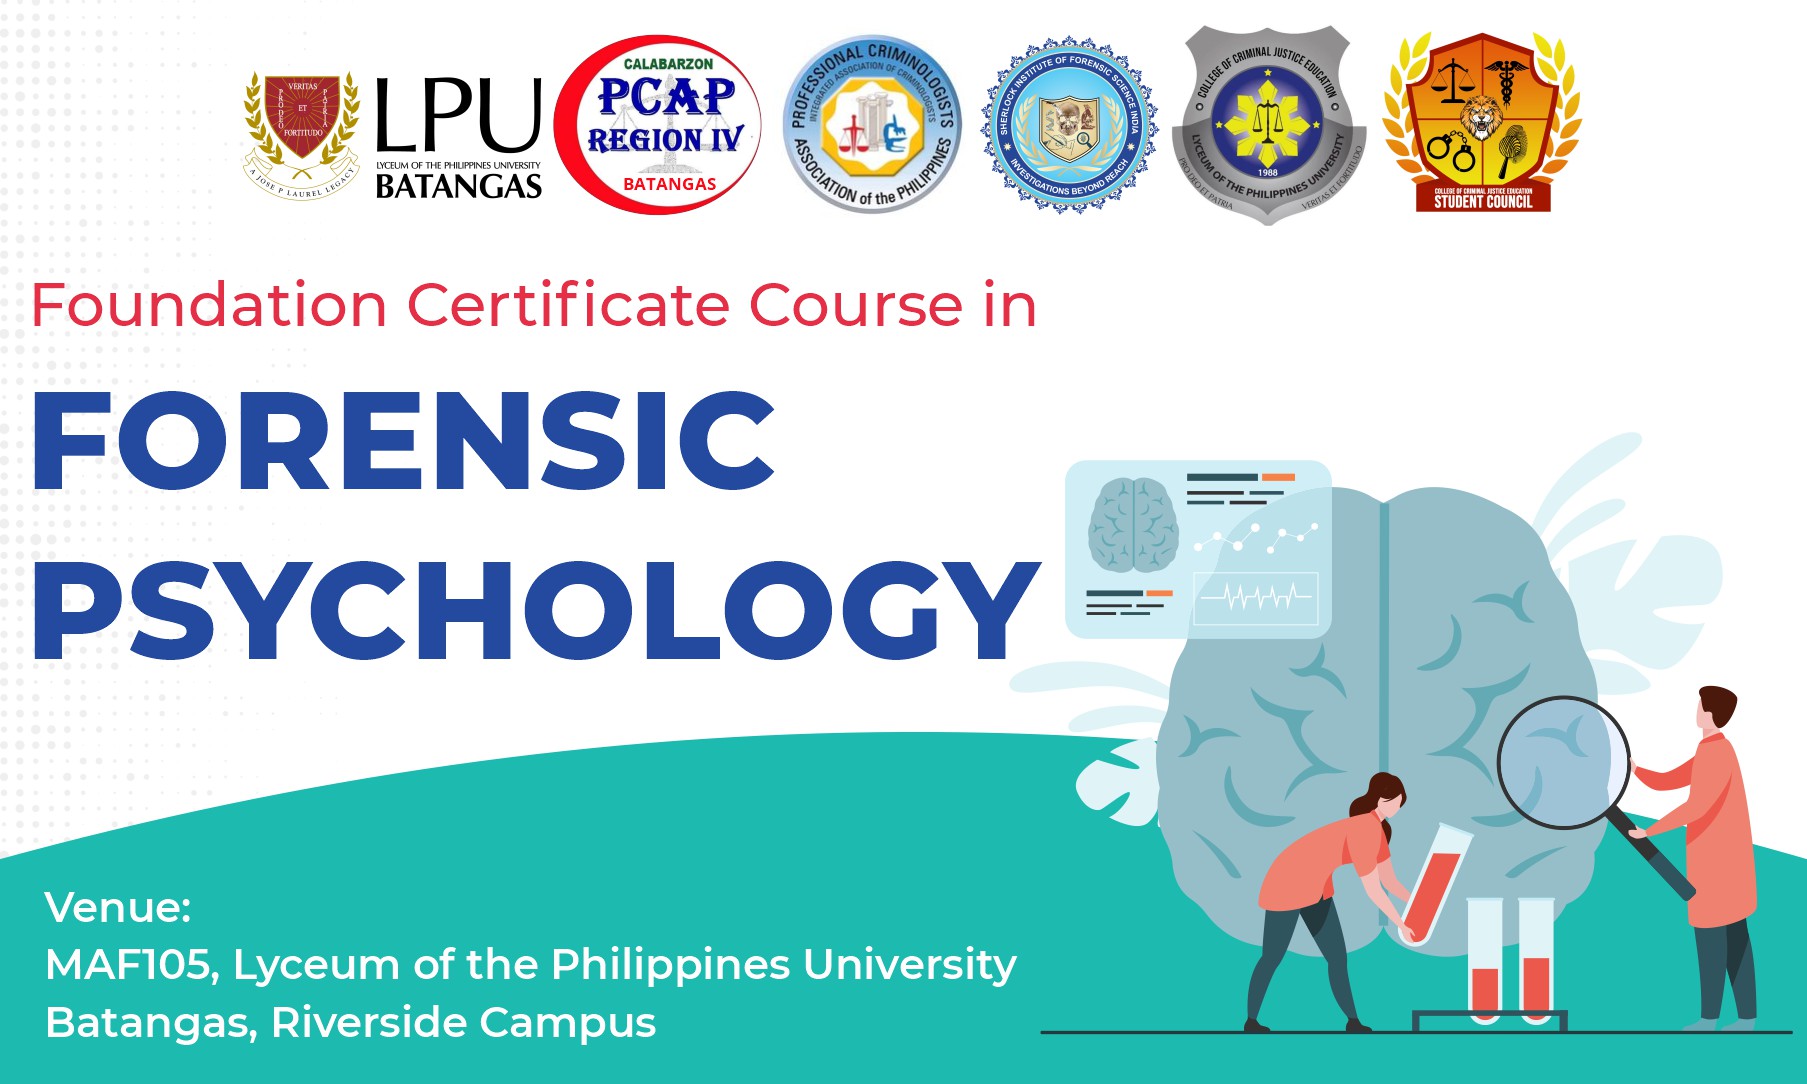 Foundation Certificate Course in Forensic Psychology